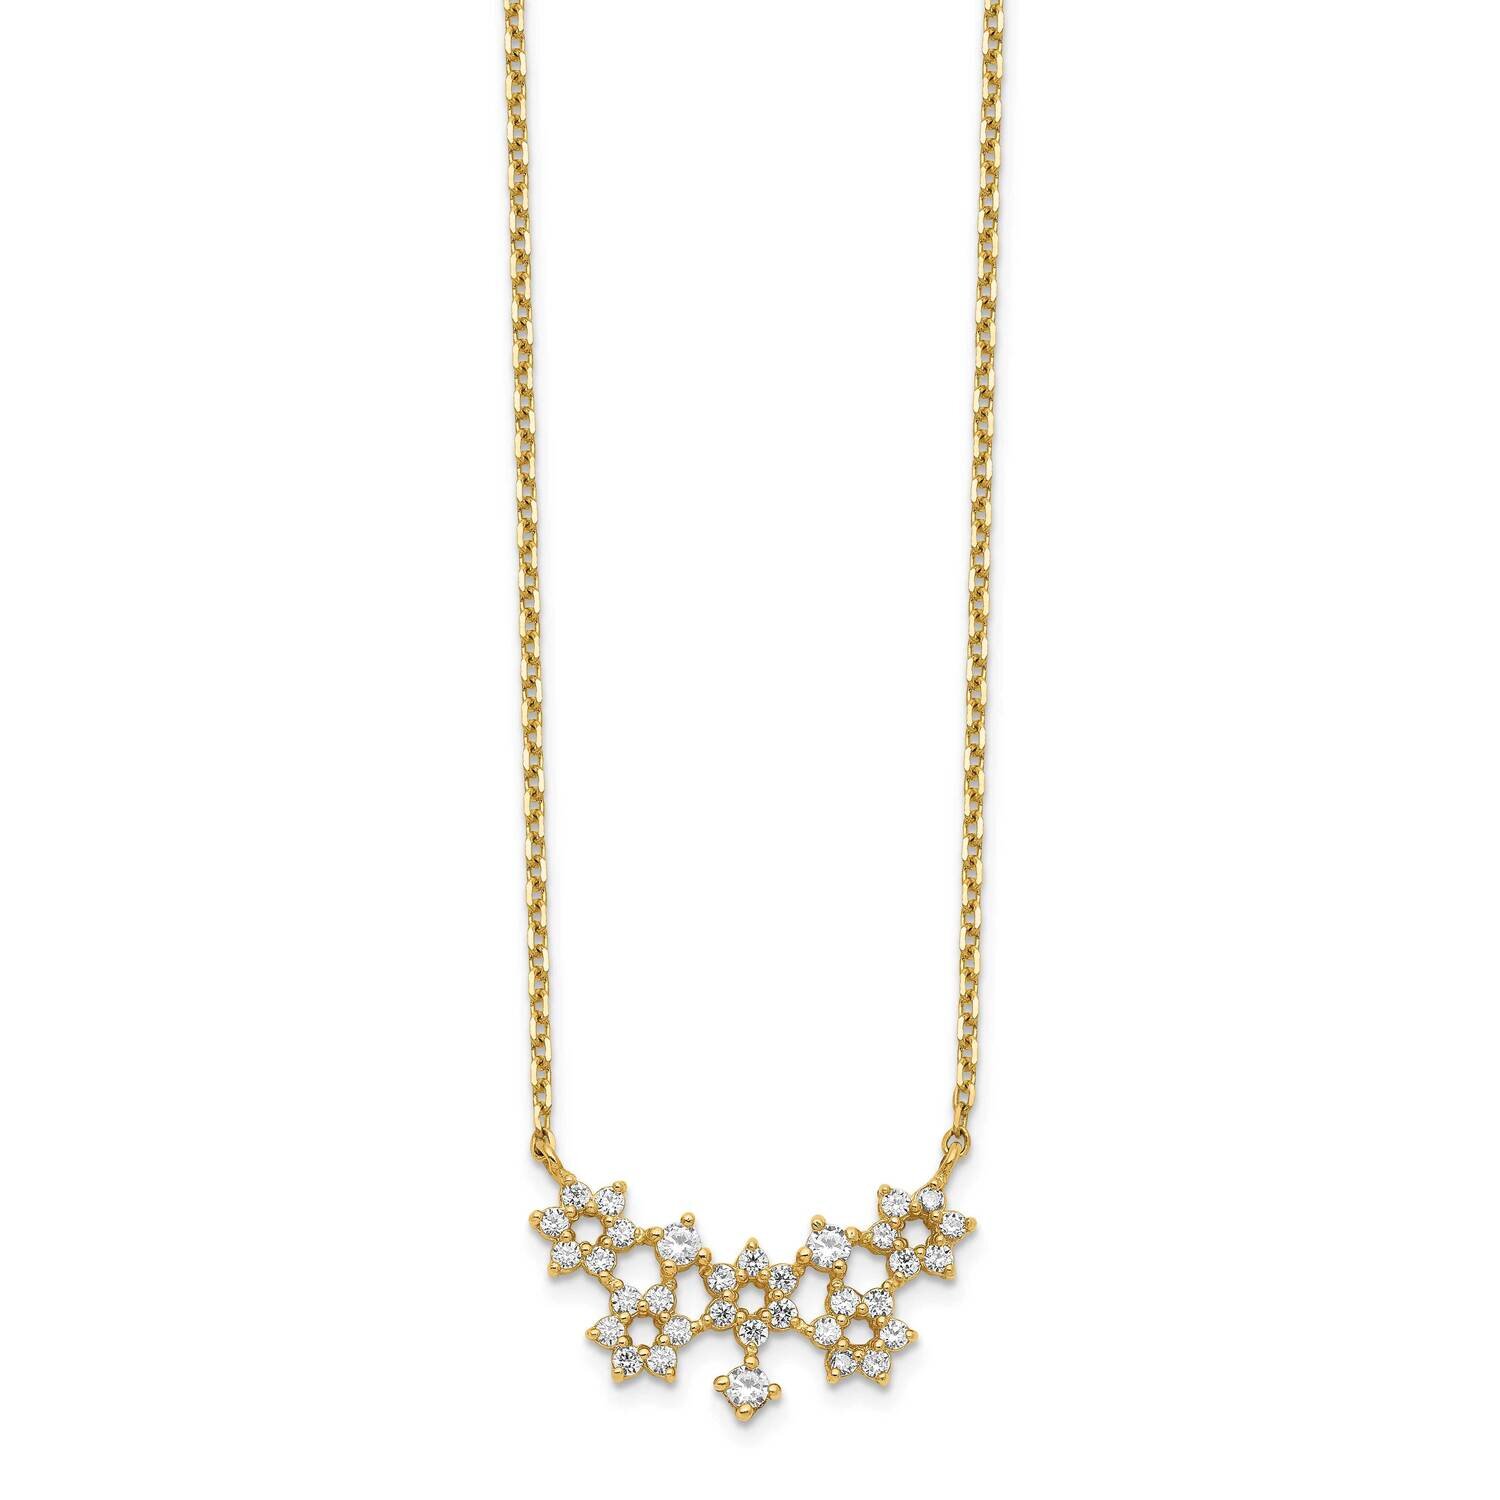 Cz Cluster with 2 Inch Extension Necklace 14k Gold SF2790-18